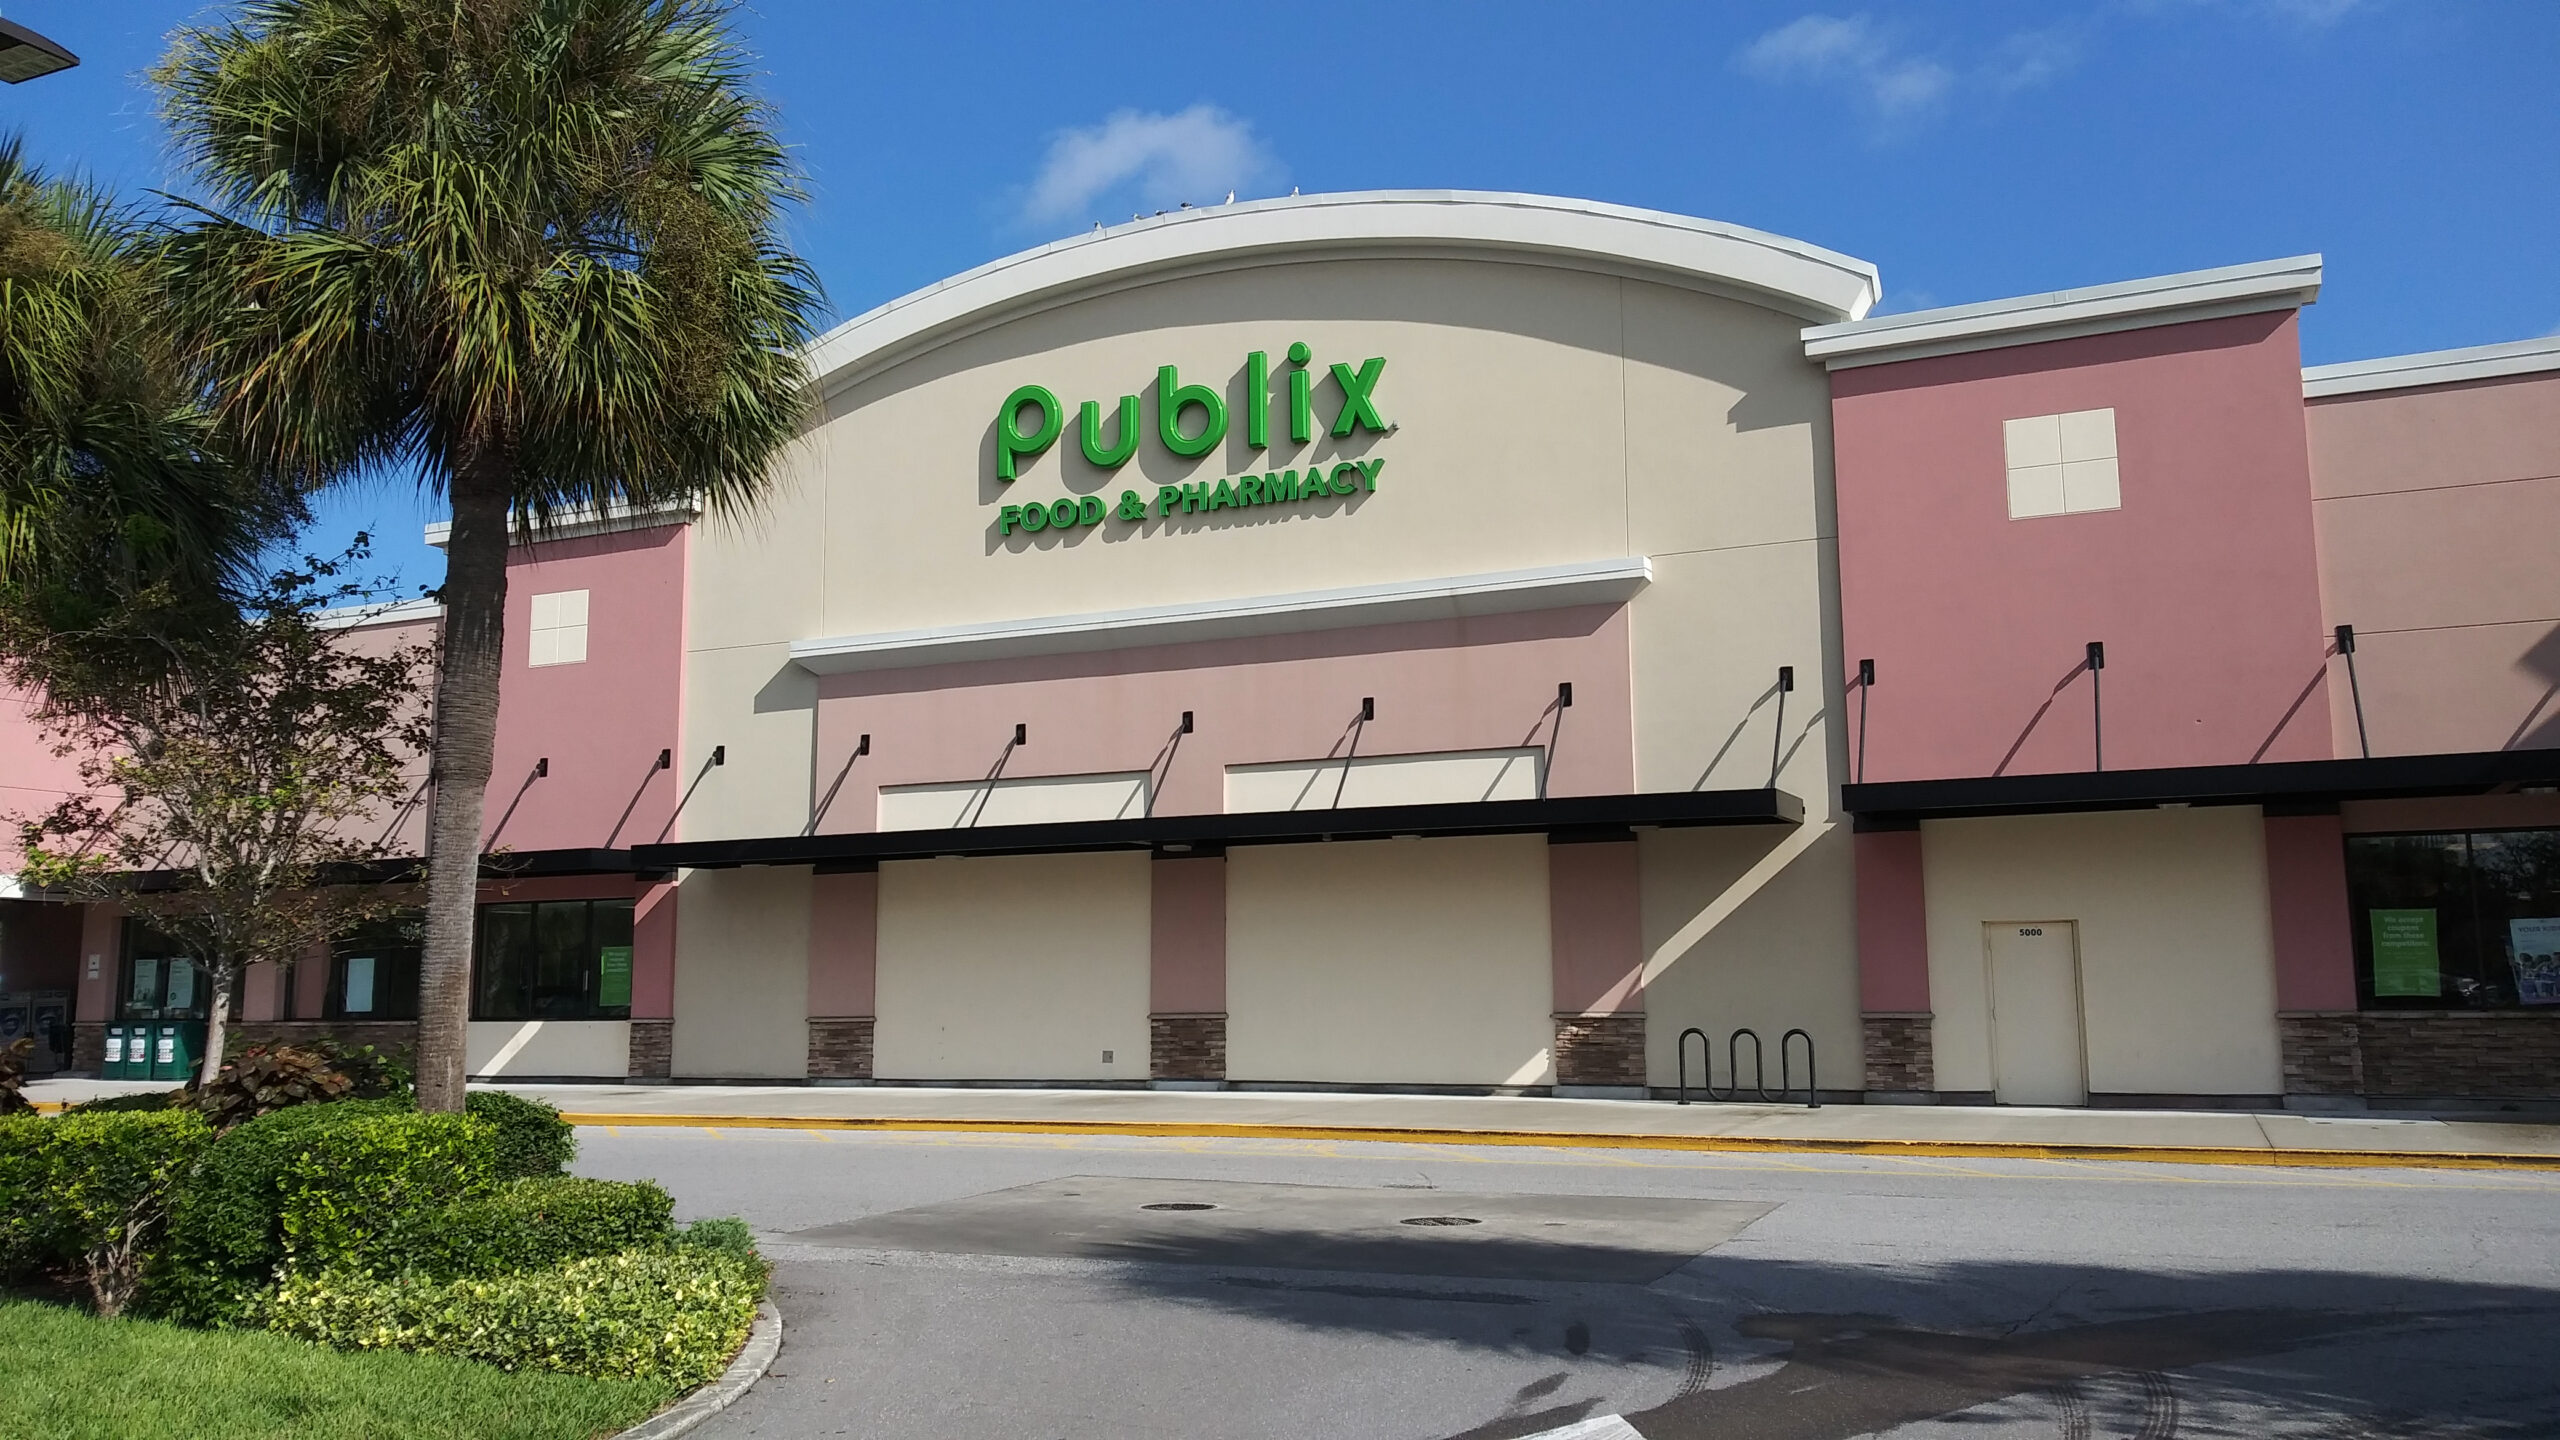 Miami-Based Meat Producer Recalls Products Over Listeria Concerns